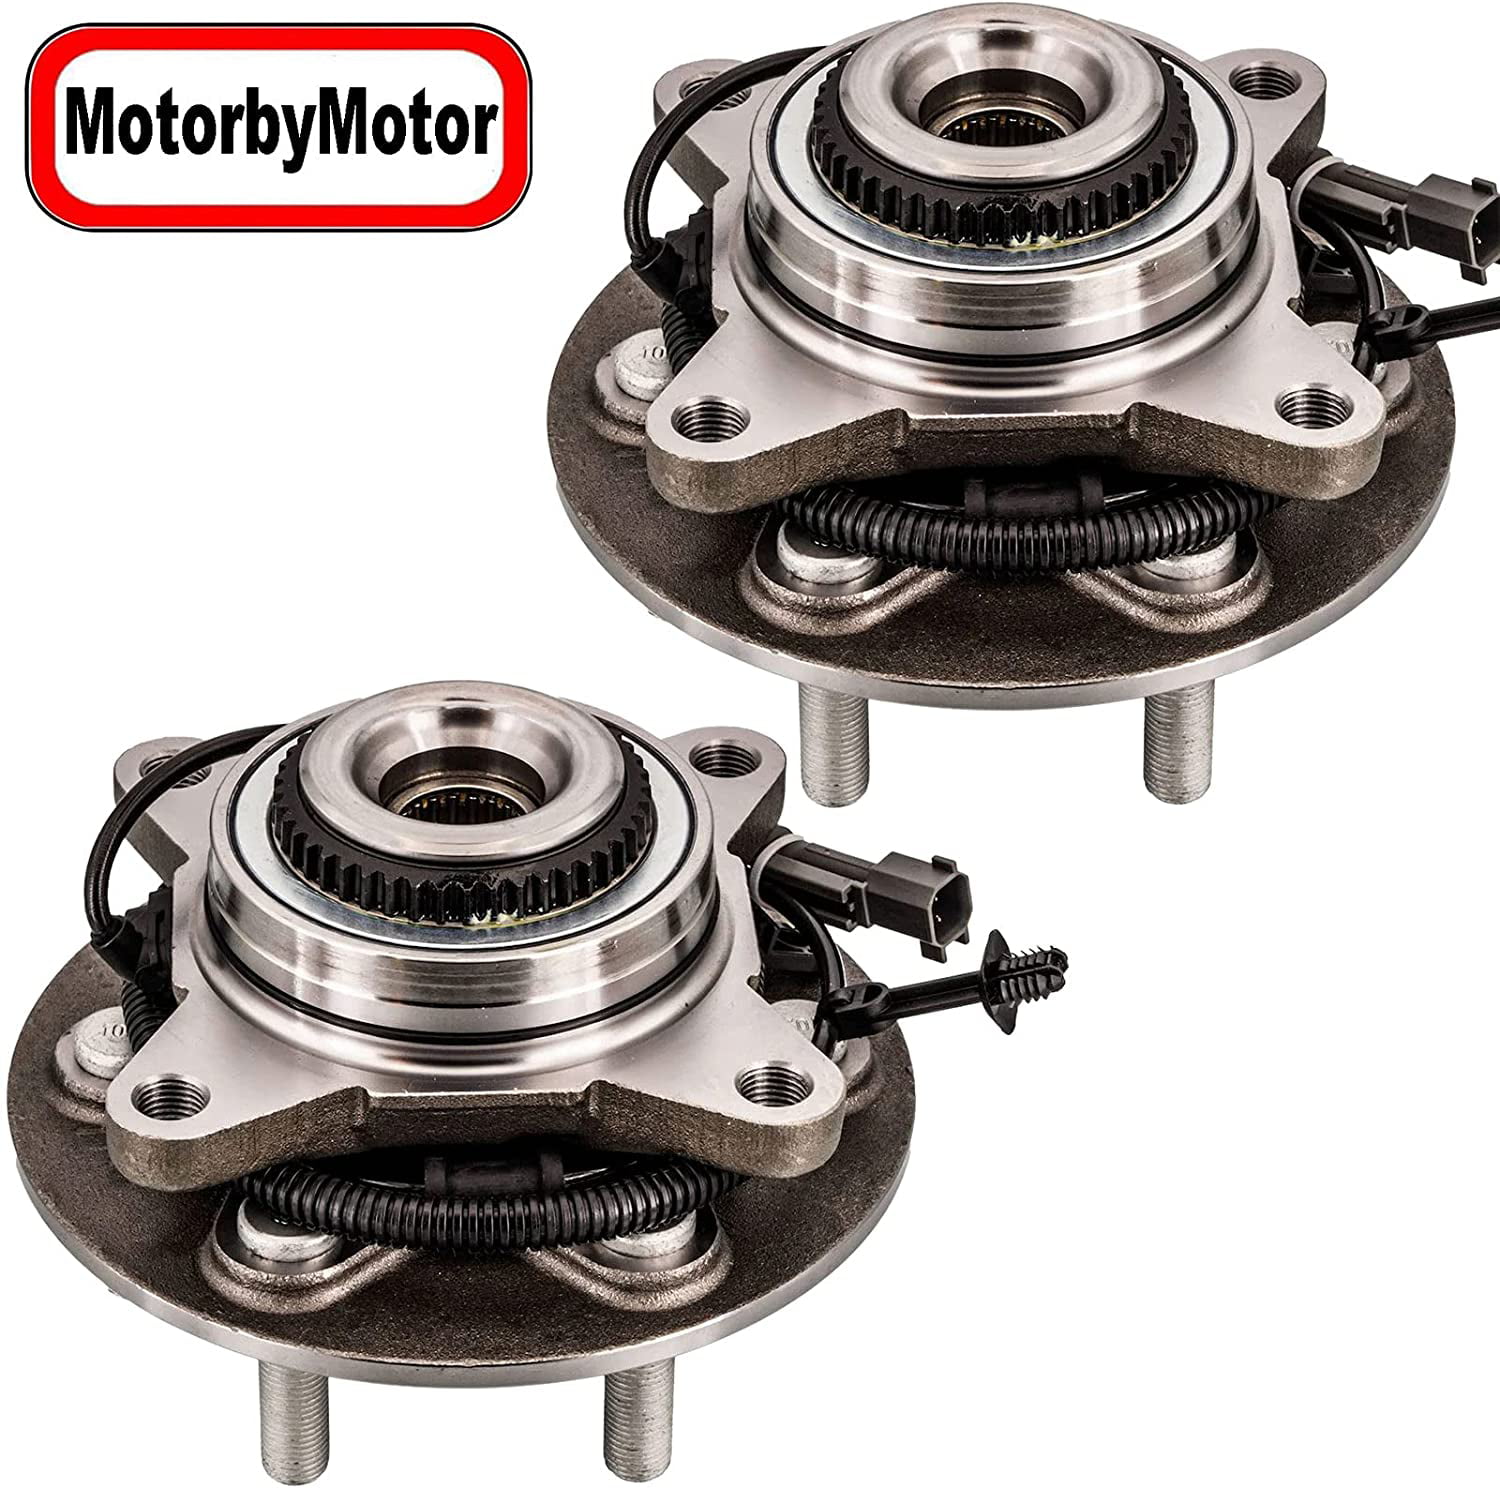 1-Pack 515177 FRONT Wheel Hub Assembly for 2018-2020 Ford F-150 4WD Model Only